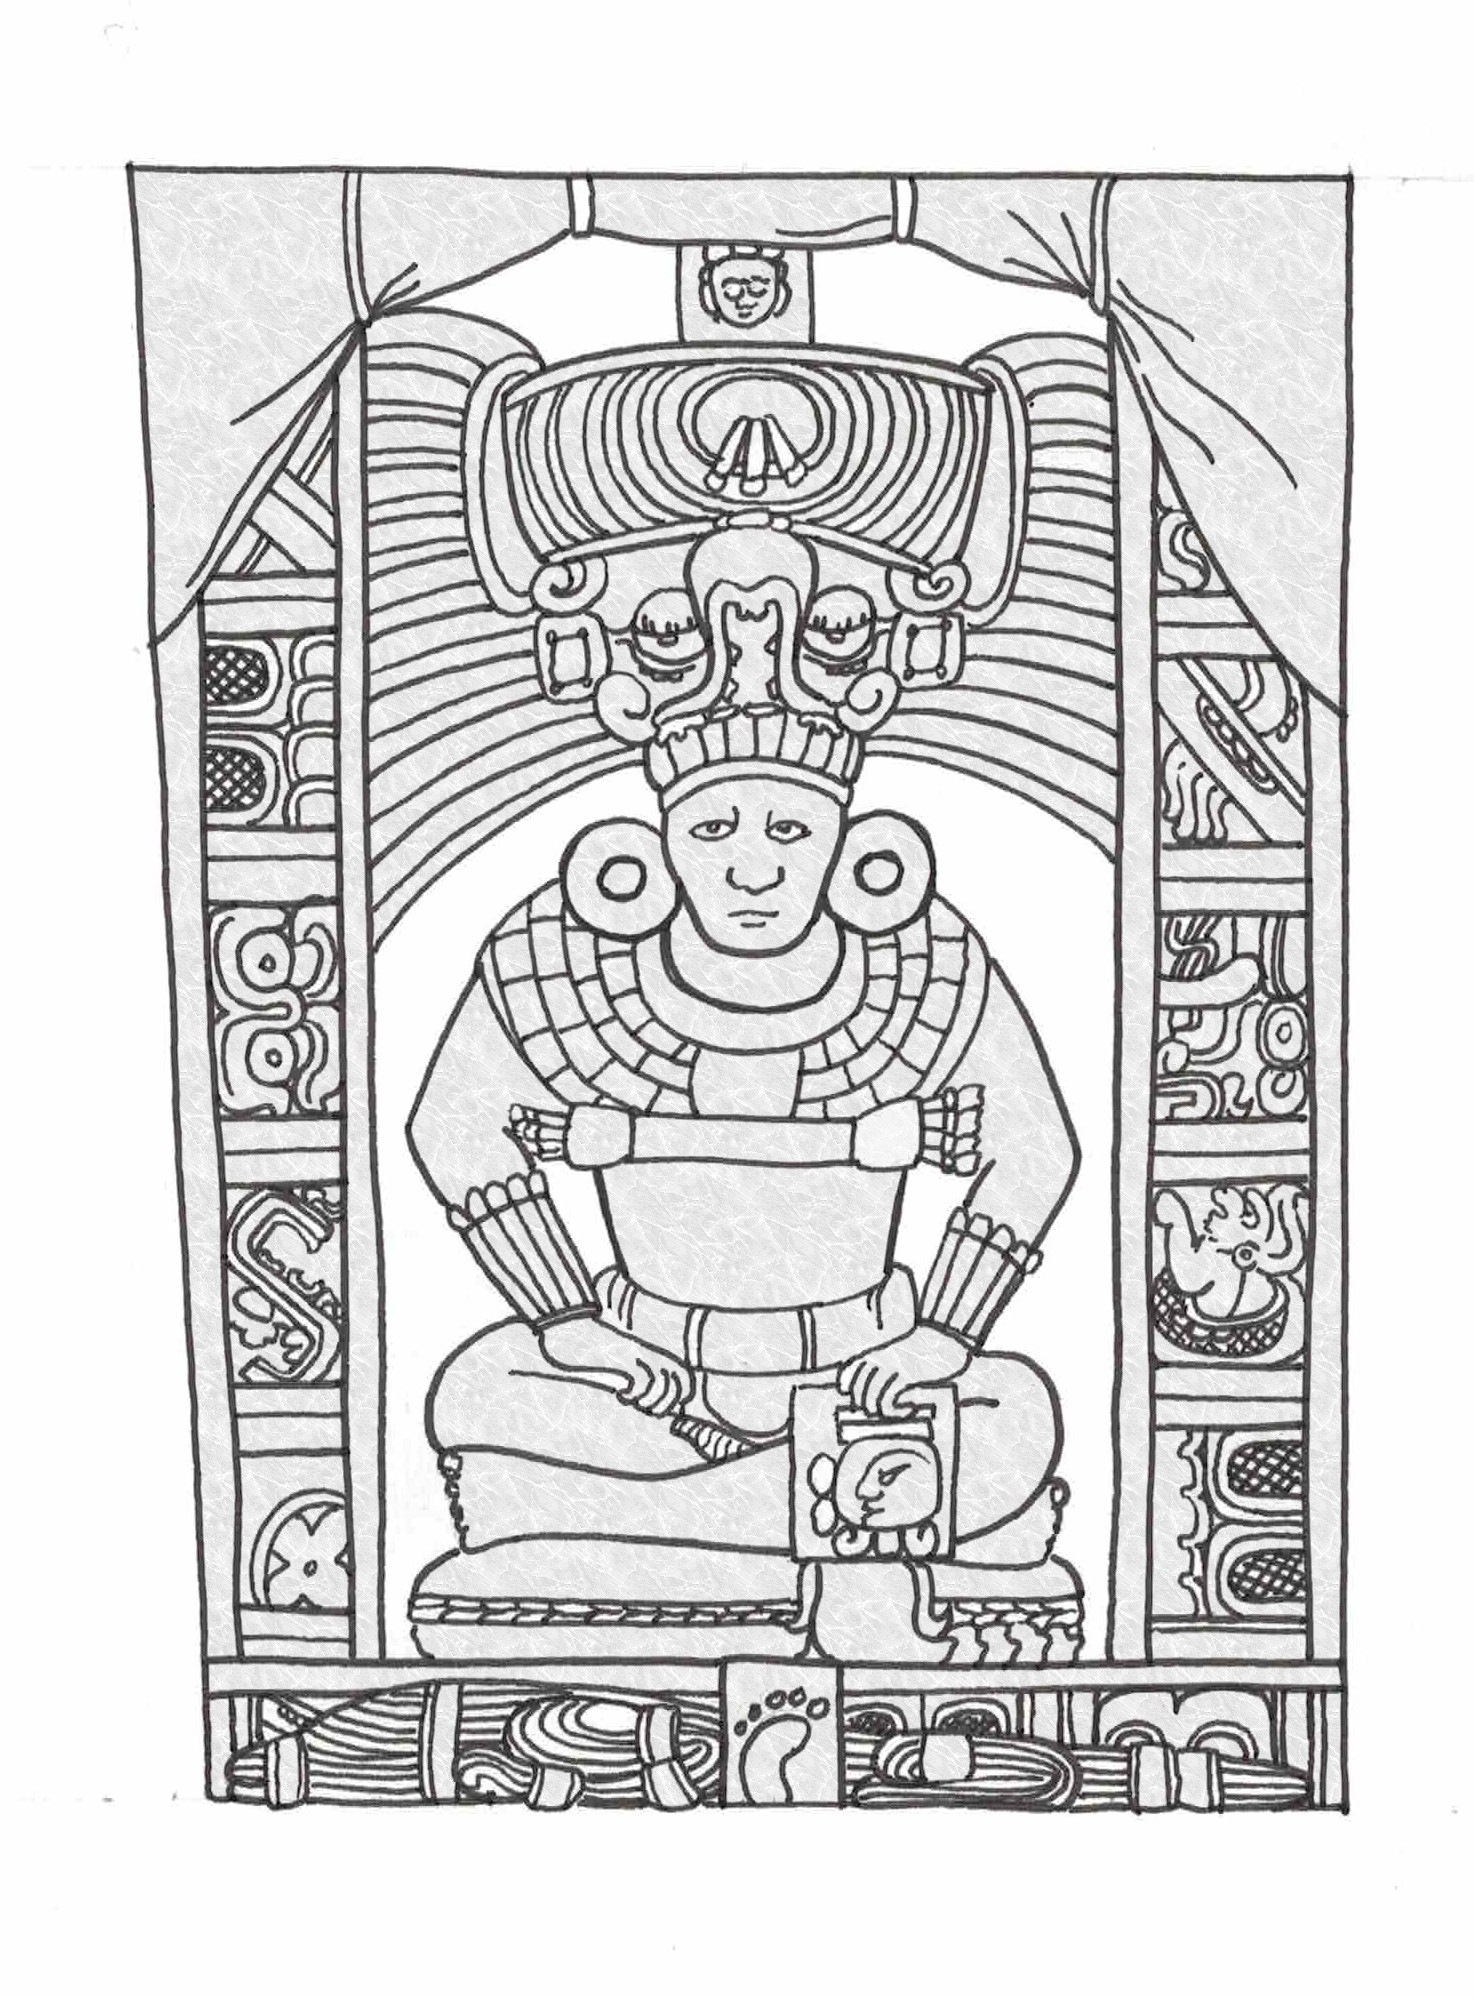 Diagram showing seated figure with glyphs surrounding it and skyband on top.